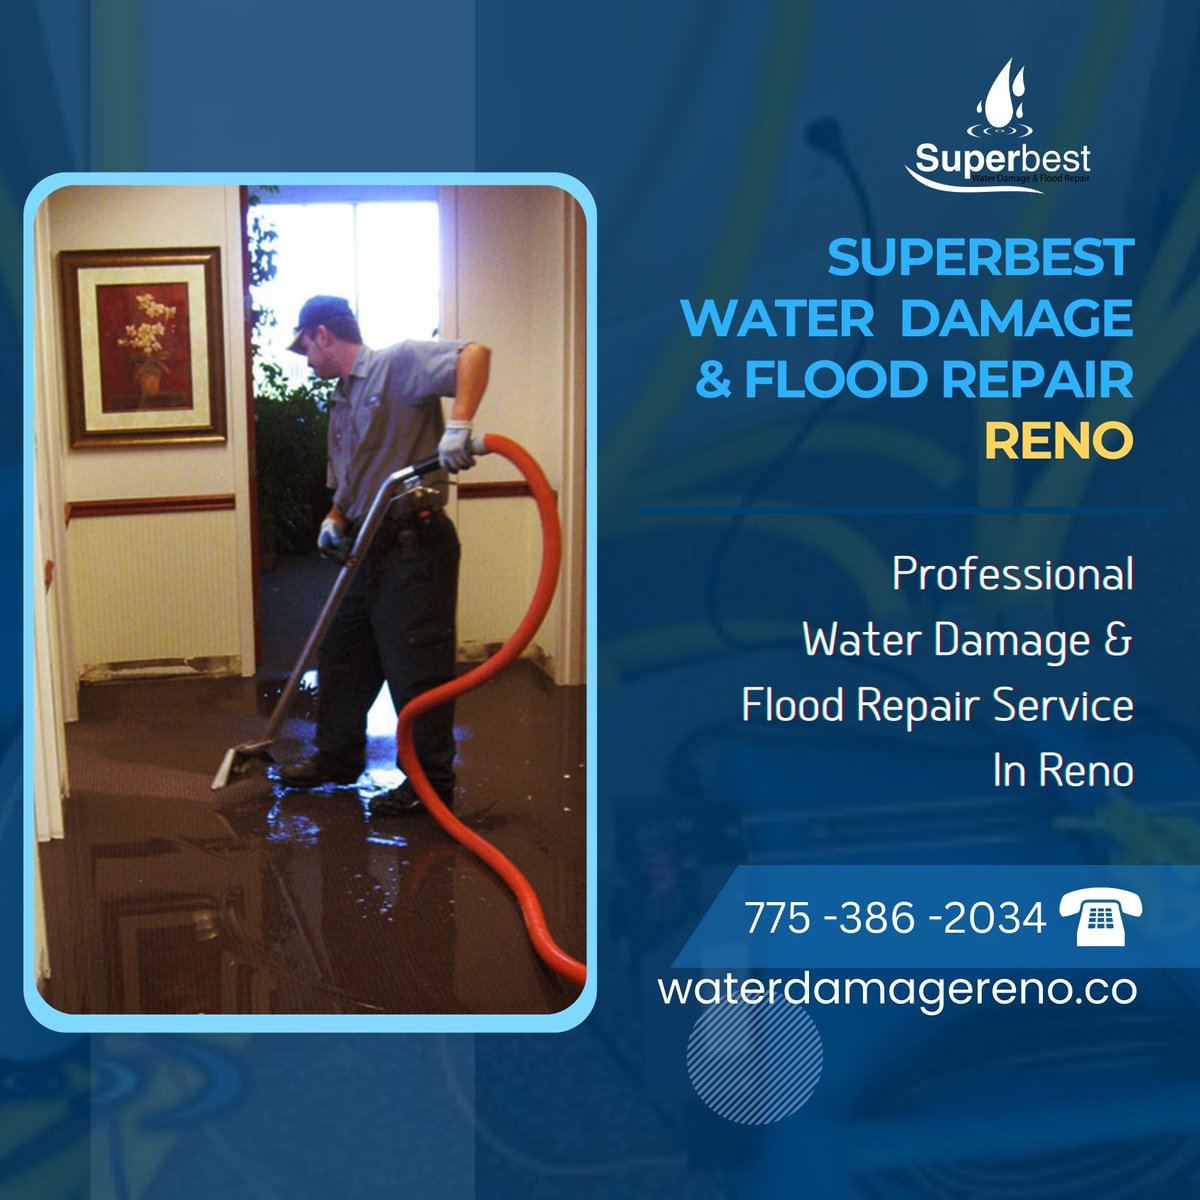 24-hour emergency water damage restoration service available | Certified restoration expert on duty | Contact us now for immediate water extraction and repair services. 
📞775 386 2034
Visit us: waterdamagereno.co
#FloodRepair #RepairingHomes #GetHelpFast #RebuildingLives